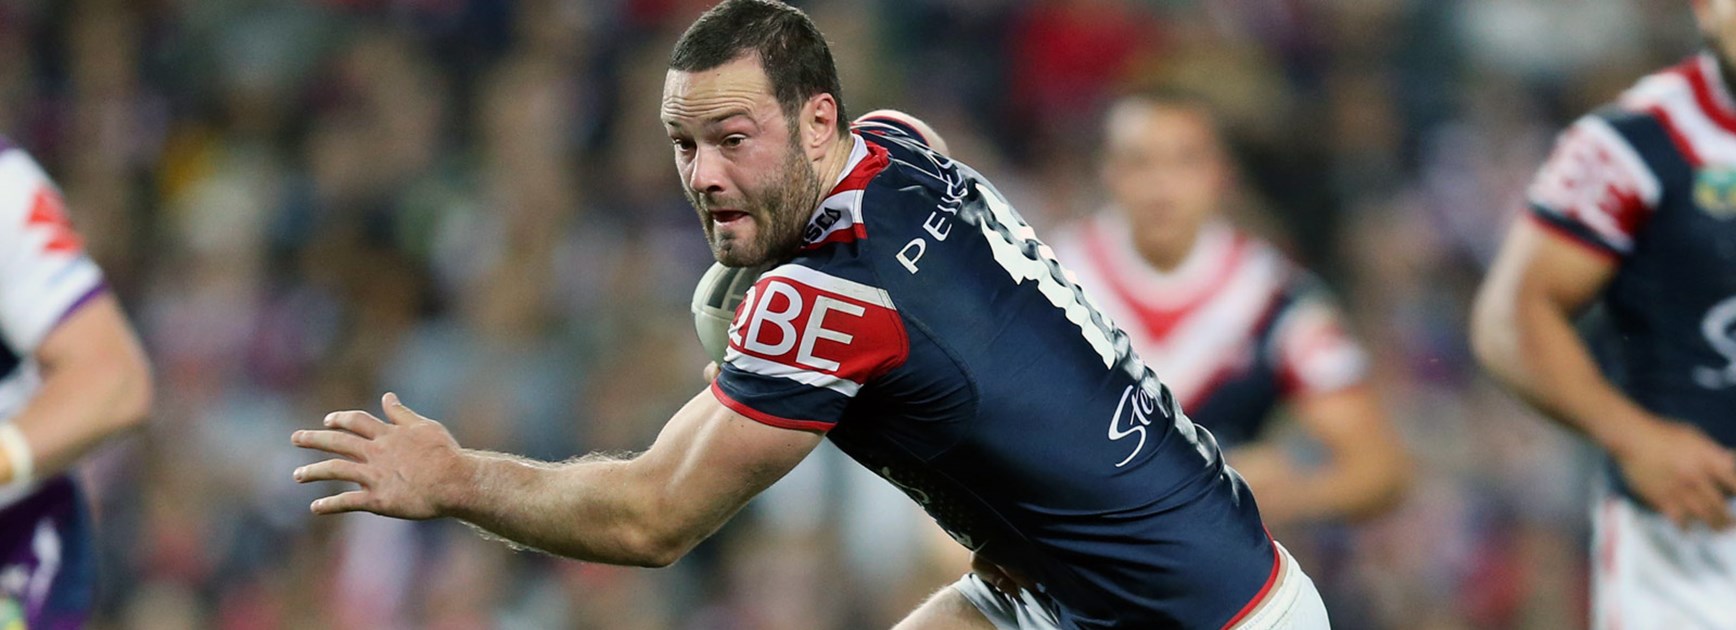 Boyd Cordner played through an injury in the first qualifying final of 2015.